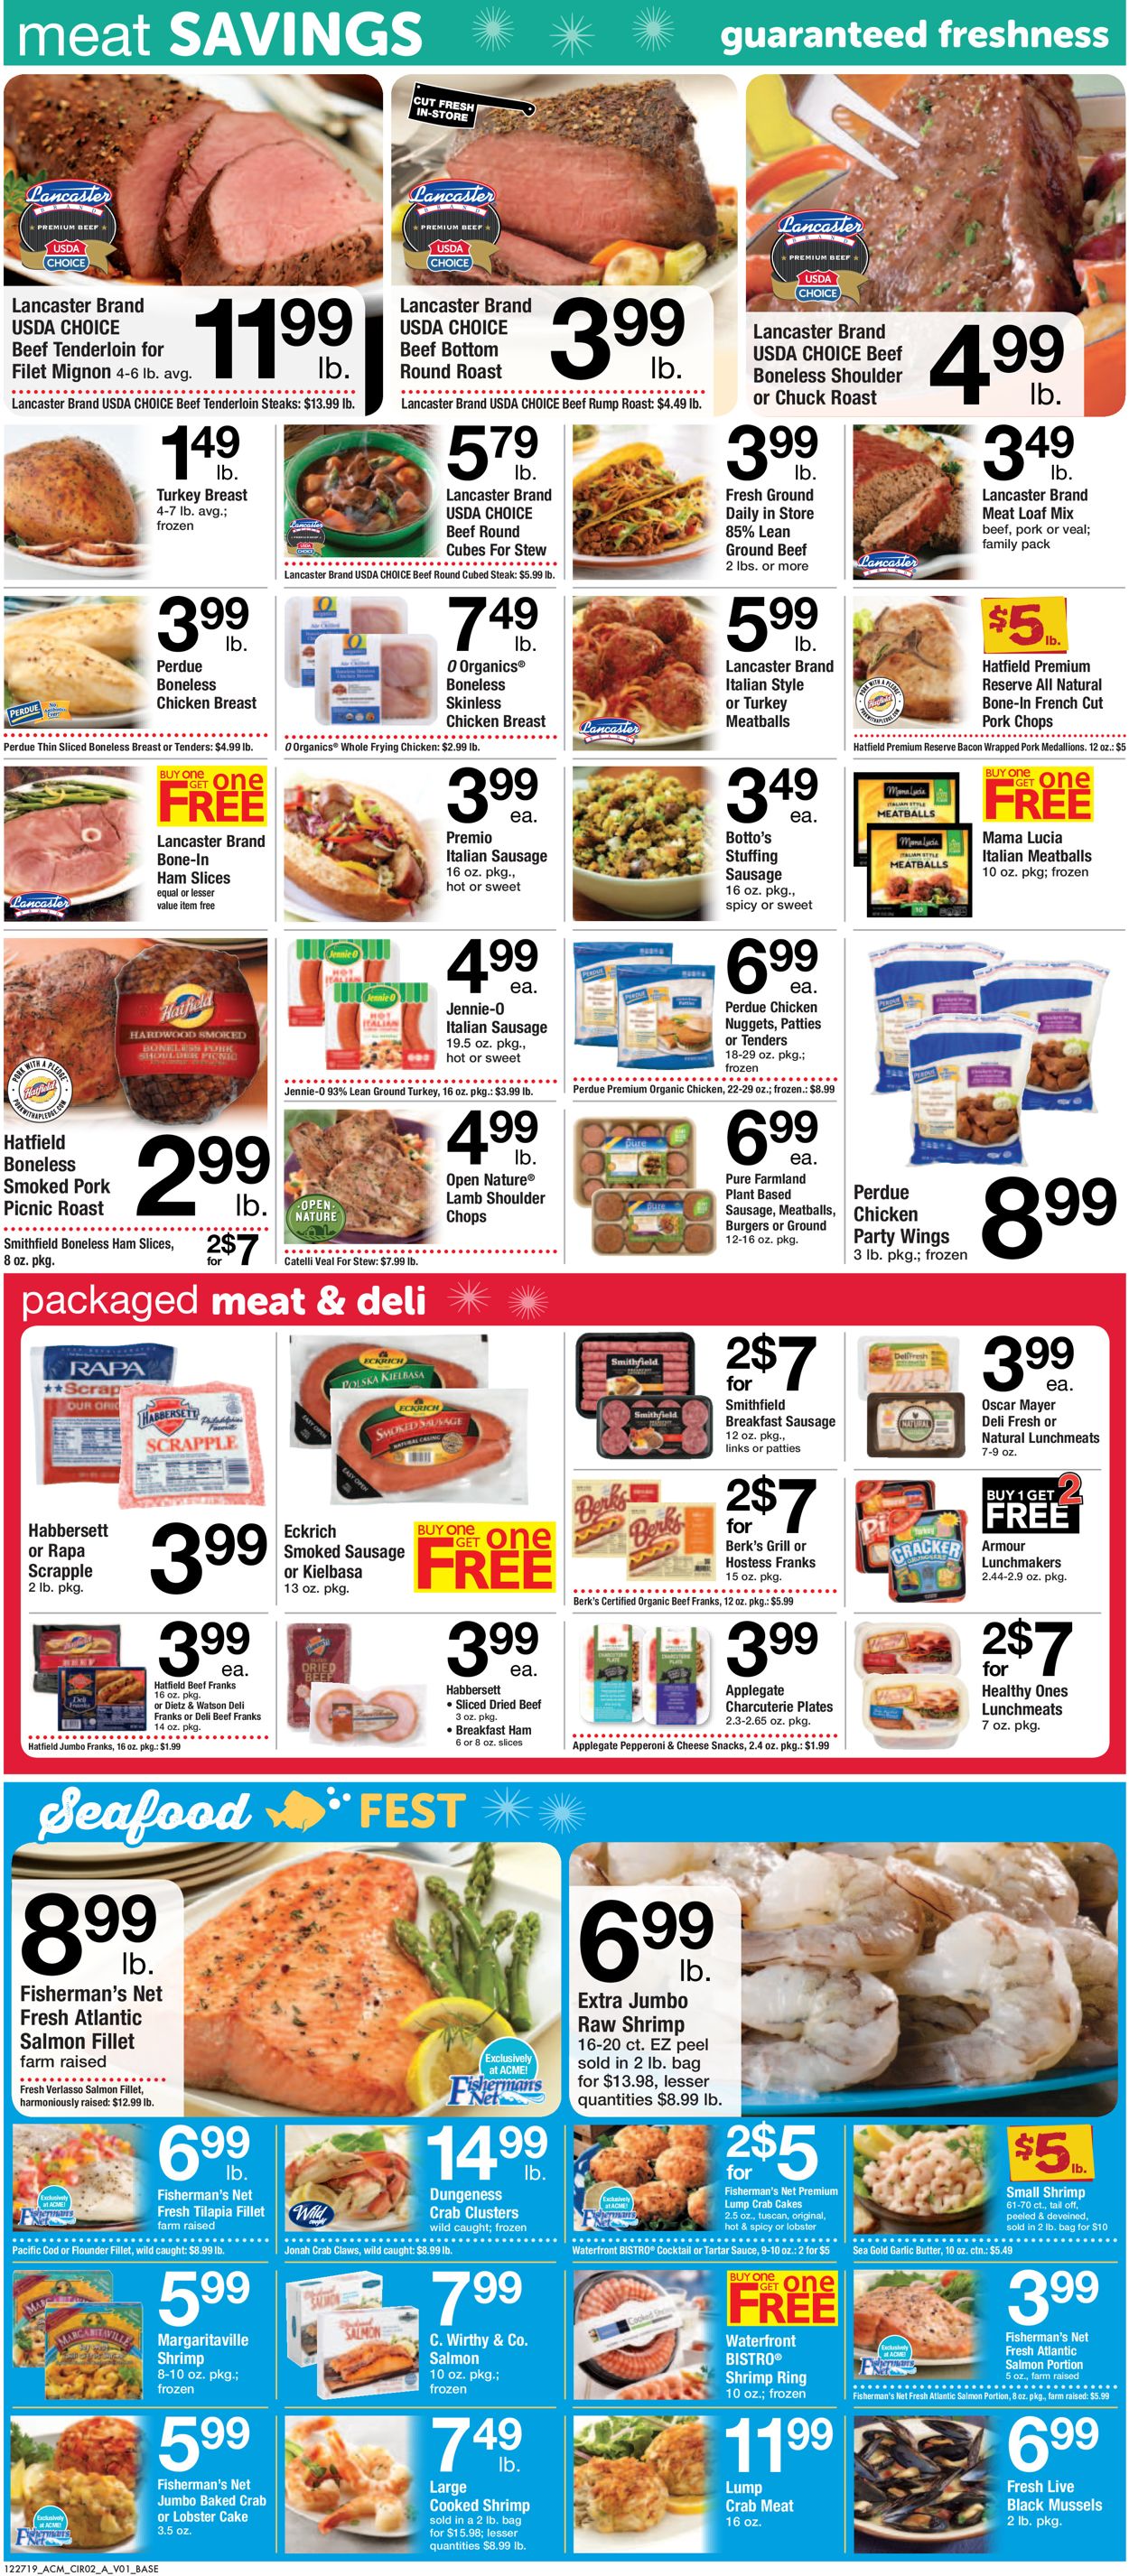 Catalogue Acme - New Year's Ad 2019/2020 from 12/27/2019